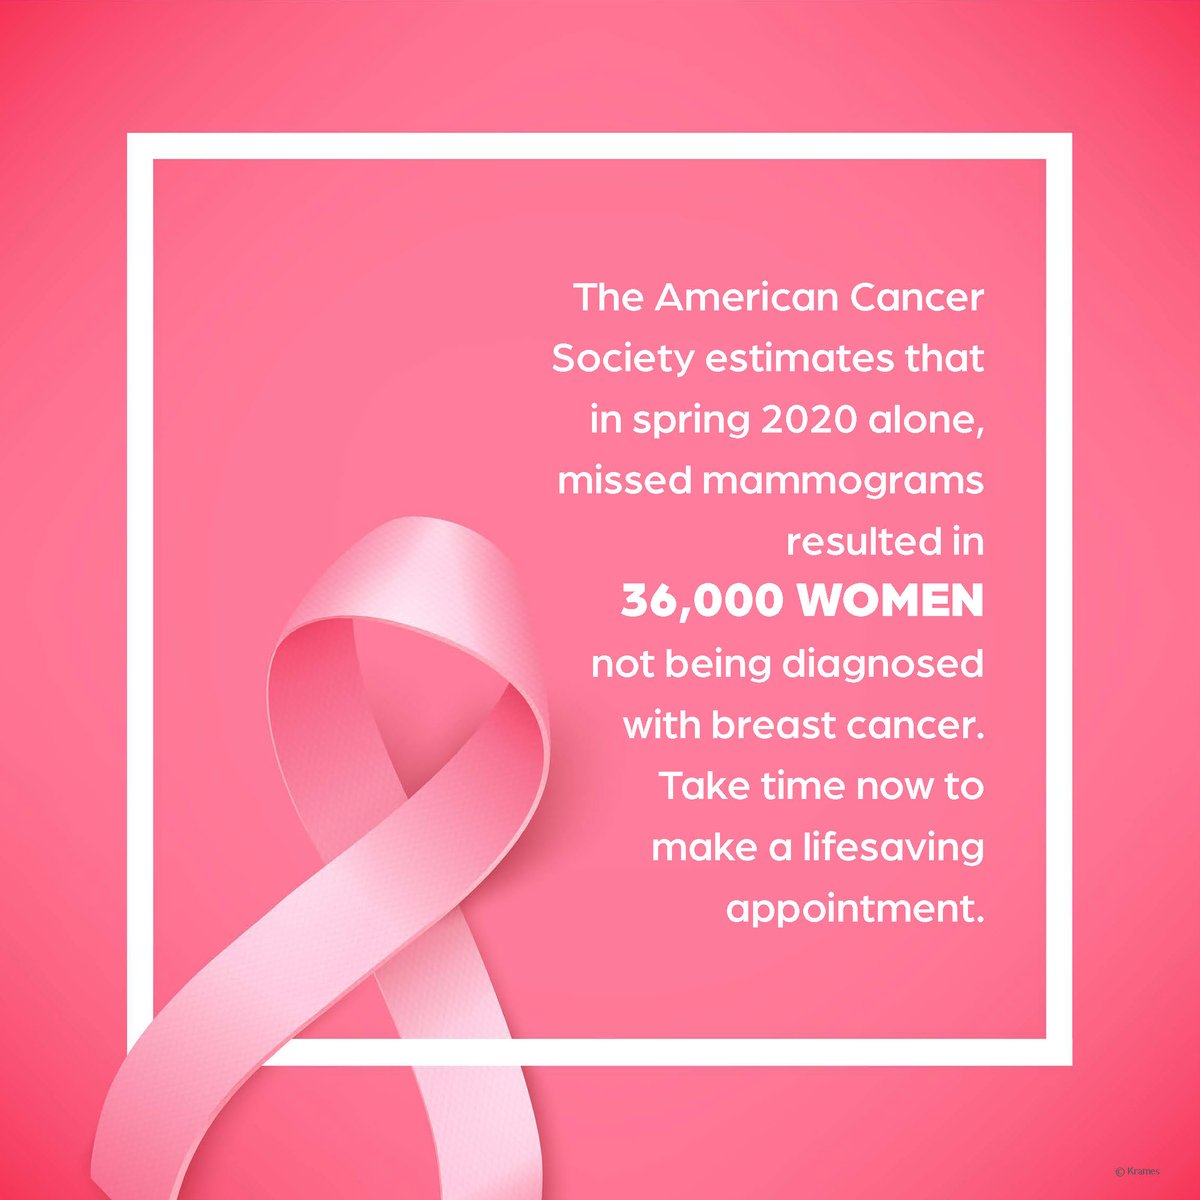 Thanks to earlier detection, more Americans are surviving cancer. That’s why you shouldn’t put off having the screening tests you need. Give us a call or visit our website to schedule your screening today. #TheHeartofaHealthyCommunity